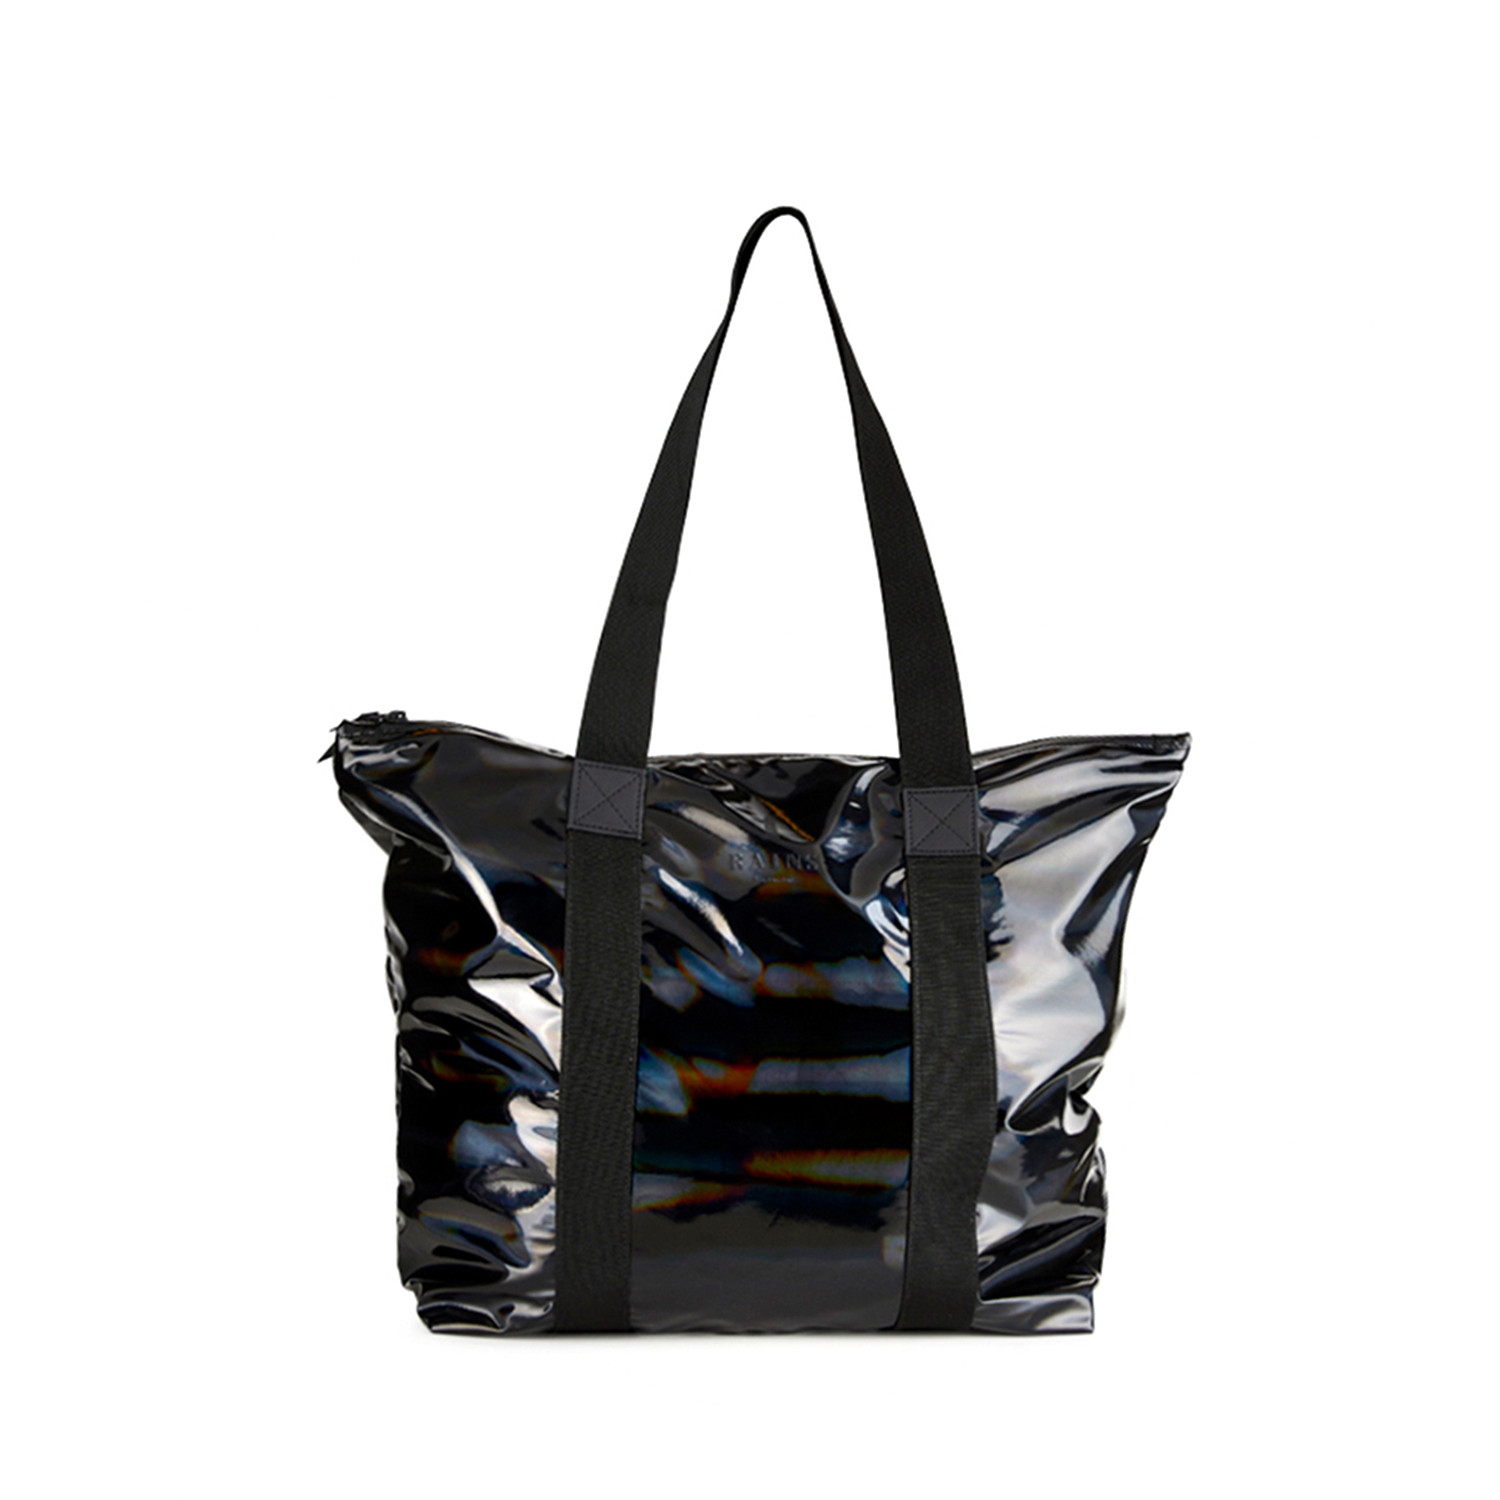 Holographic Tote Bag Rush // Holographic Black - Rains - Touch of Modern